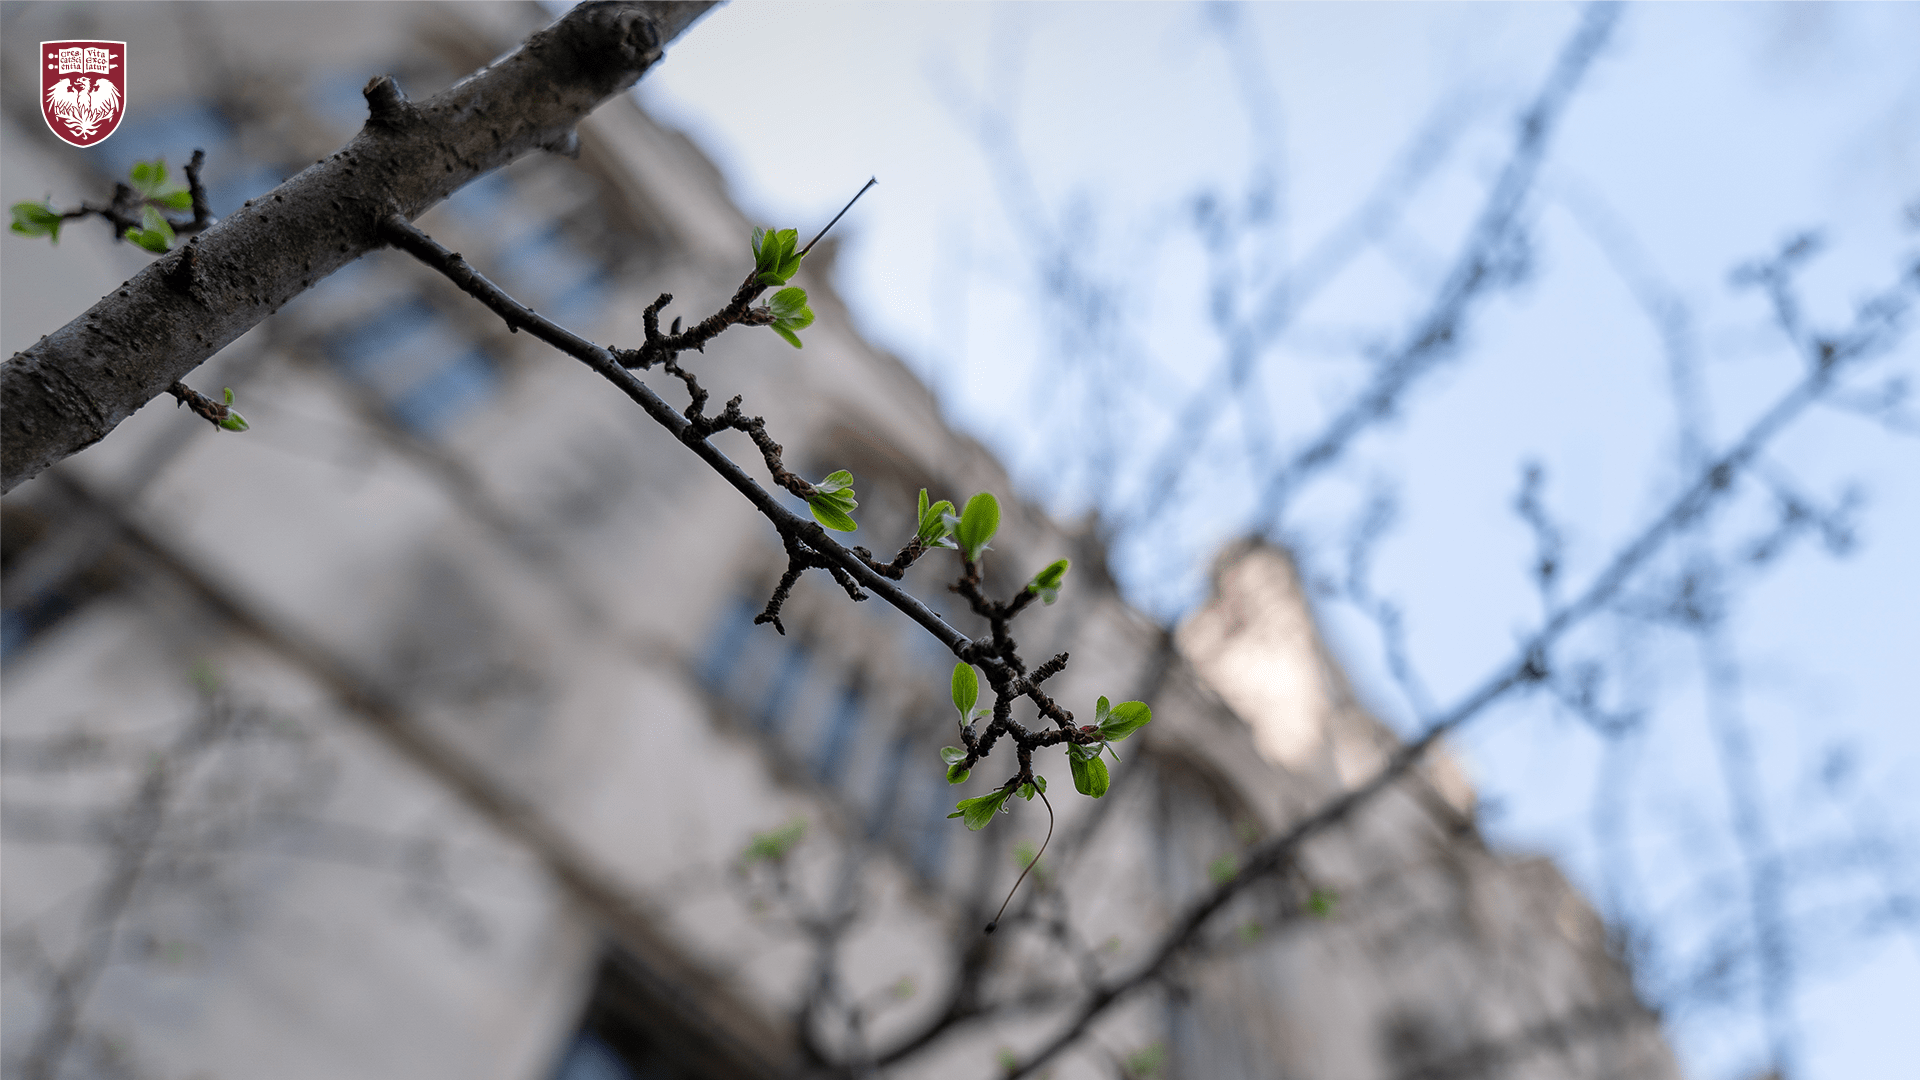 Detailed view of green leaves beginning to bud on brown tree branches